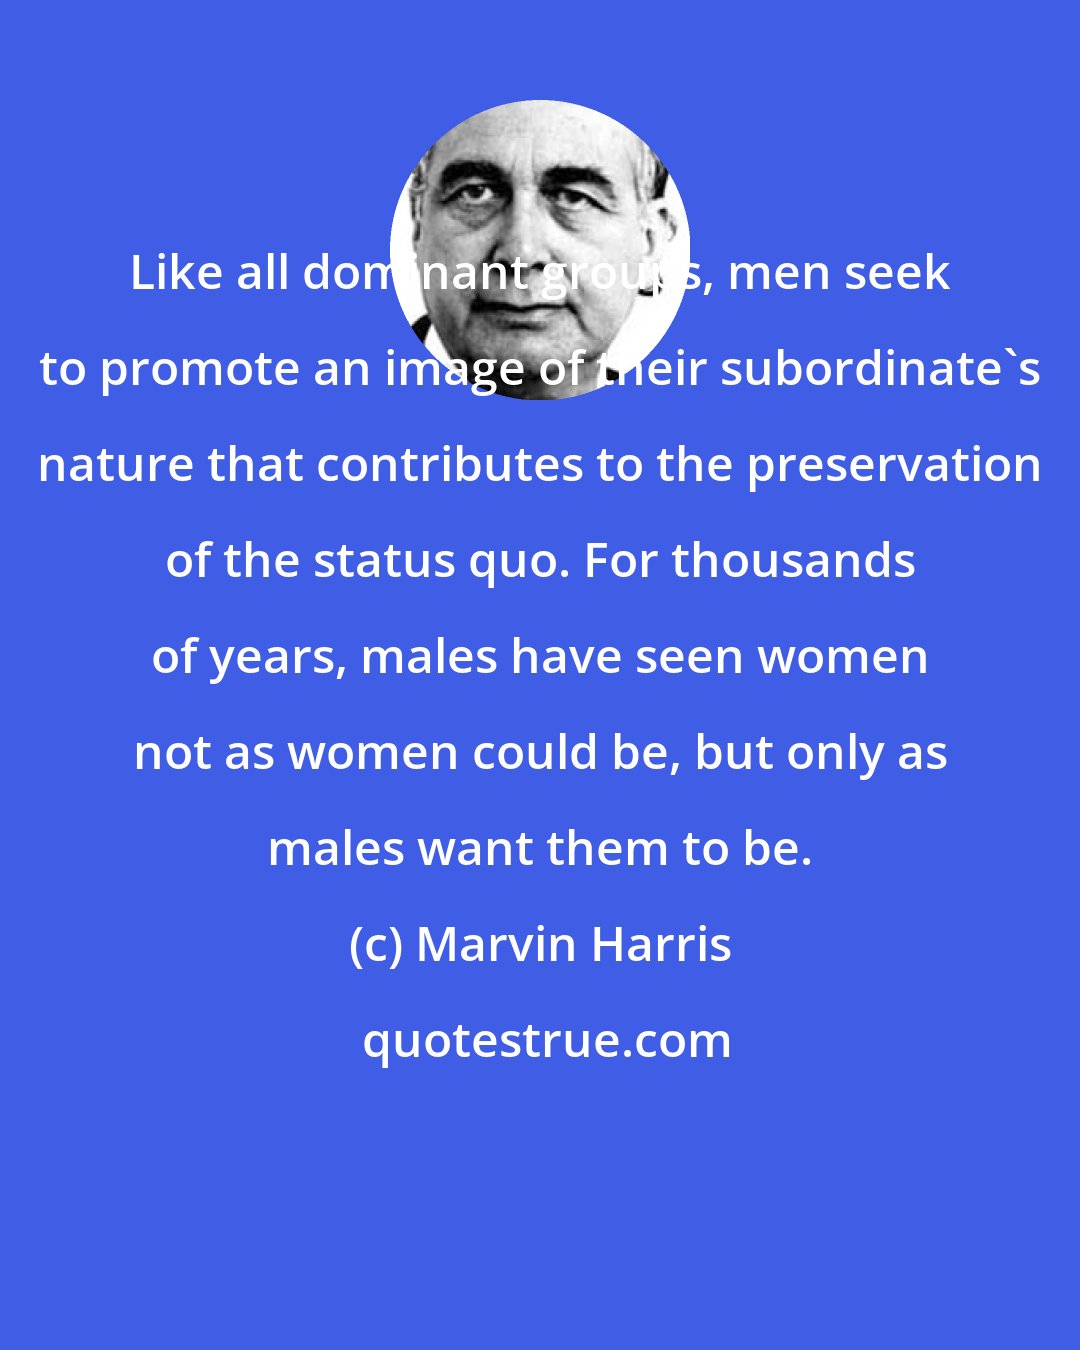 Marvin Harris: Like all dominant groups, men seek to promote an image of their subordinate's nature that contributes to the preservation of the status quo. For thousands of years, males have seen women not as women could be, but only as males want them to be.